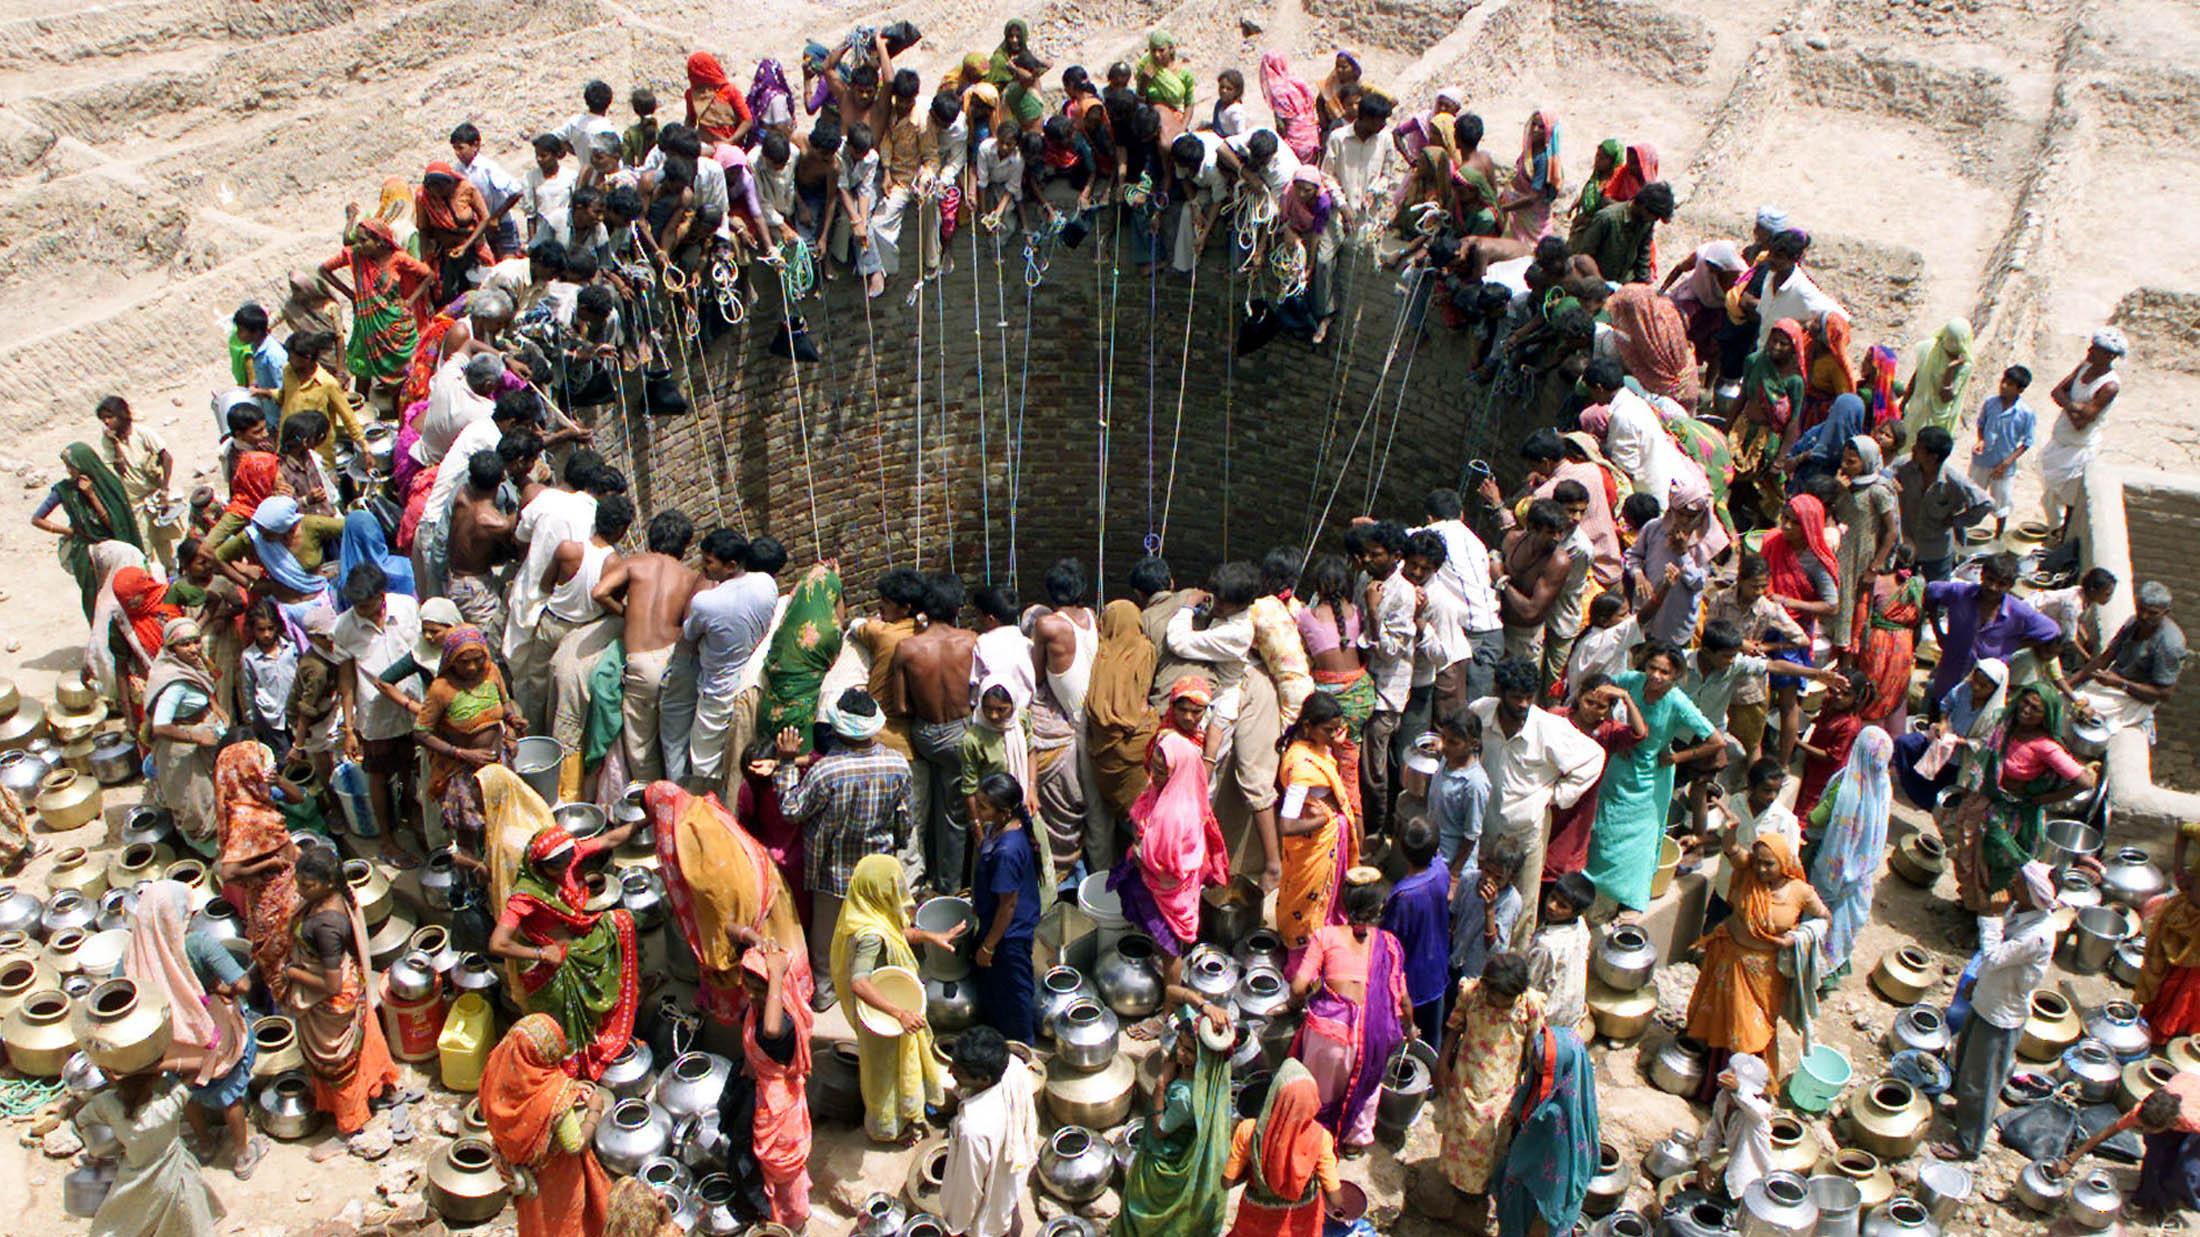 This is an iconic photo that shows a large number of people gathered around an open well. 